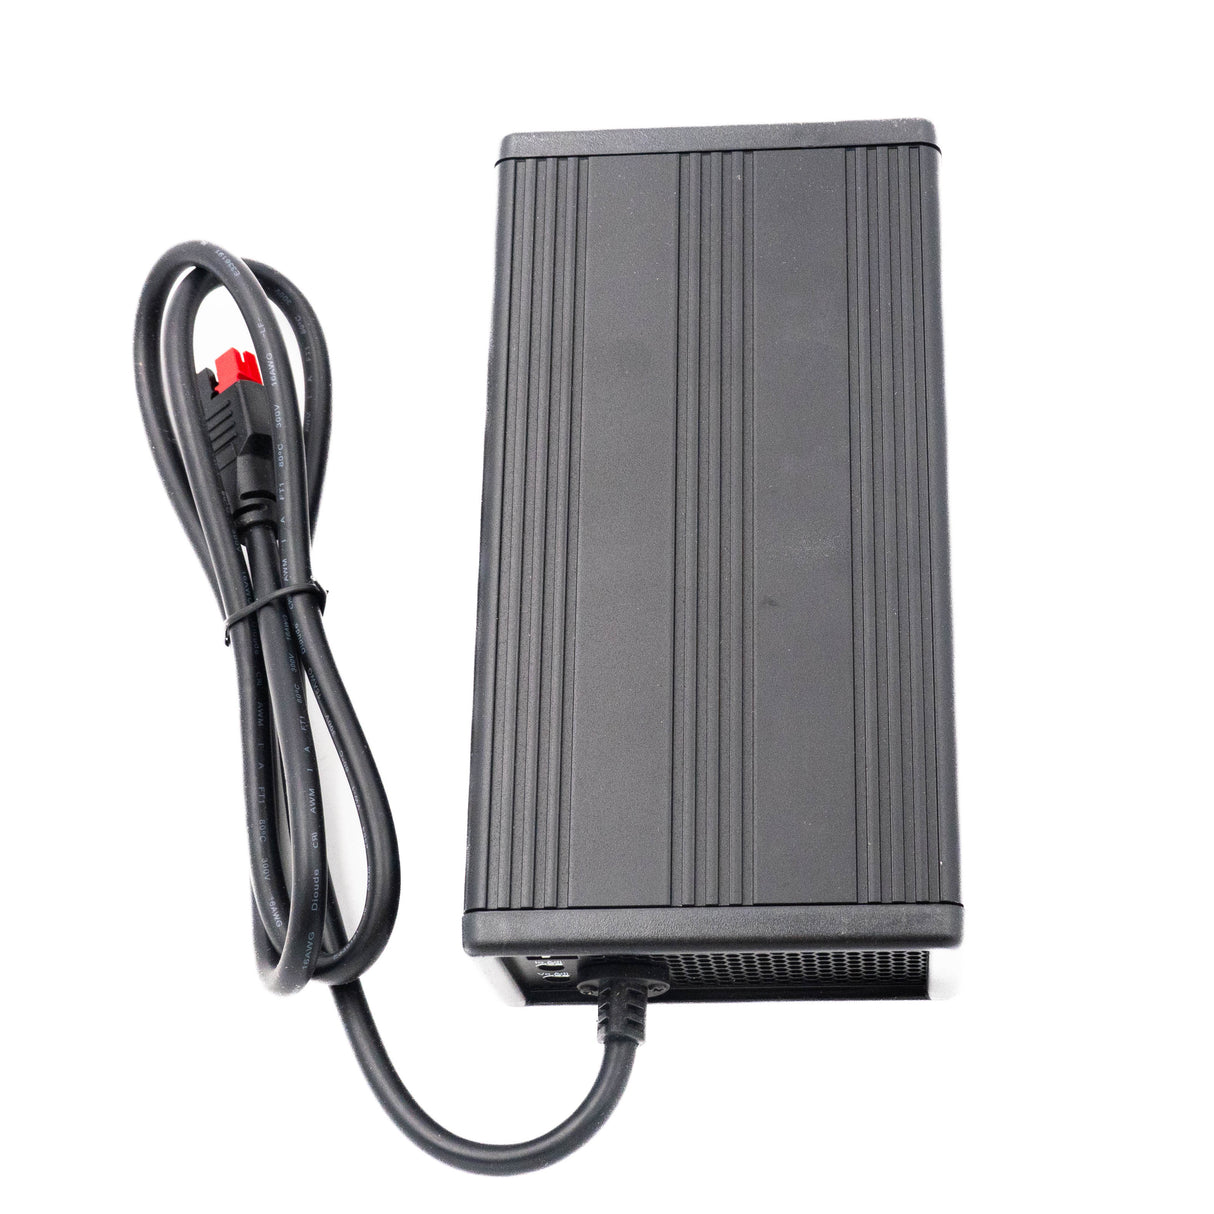 Mean Well NPB-120-48AD1 Battery Charger 120W 48V Anderson Connector - PHOTO 4